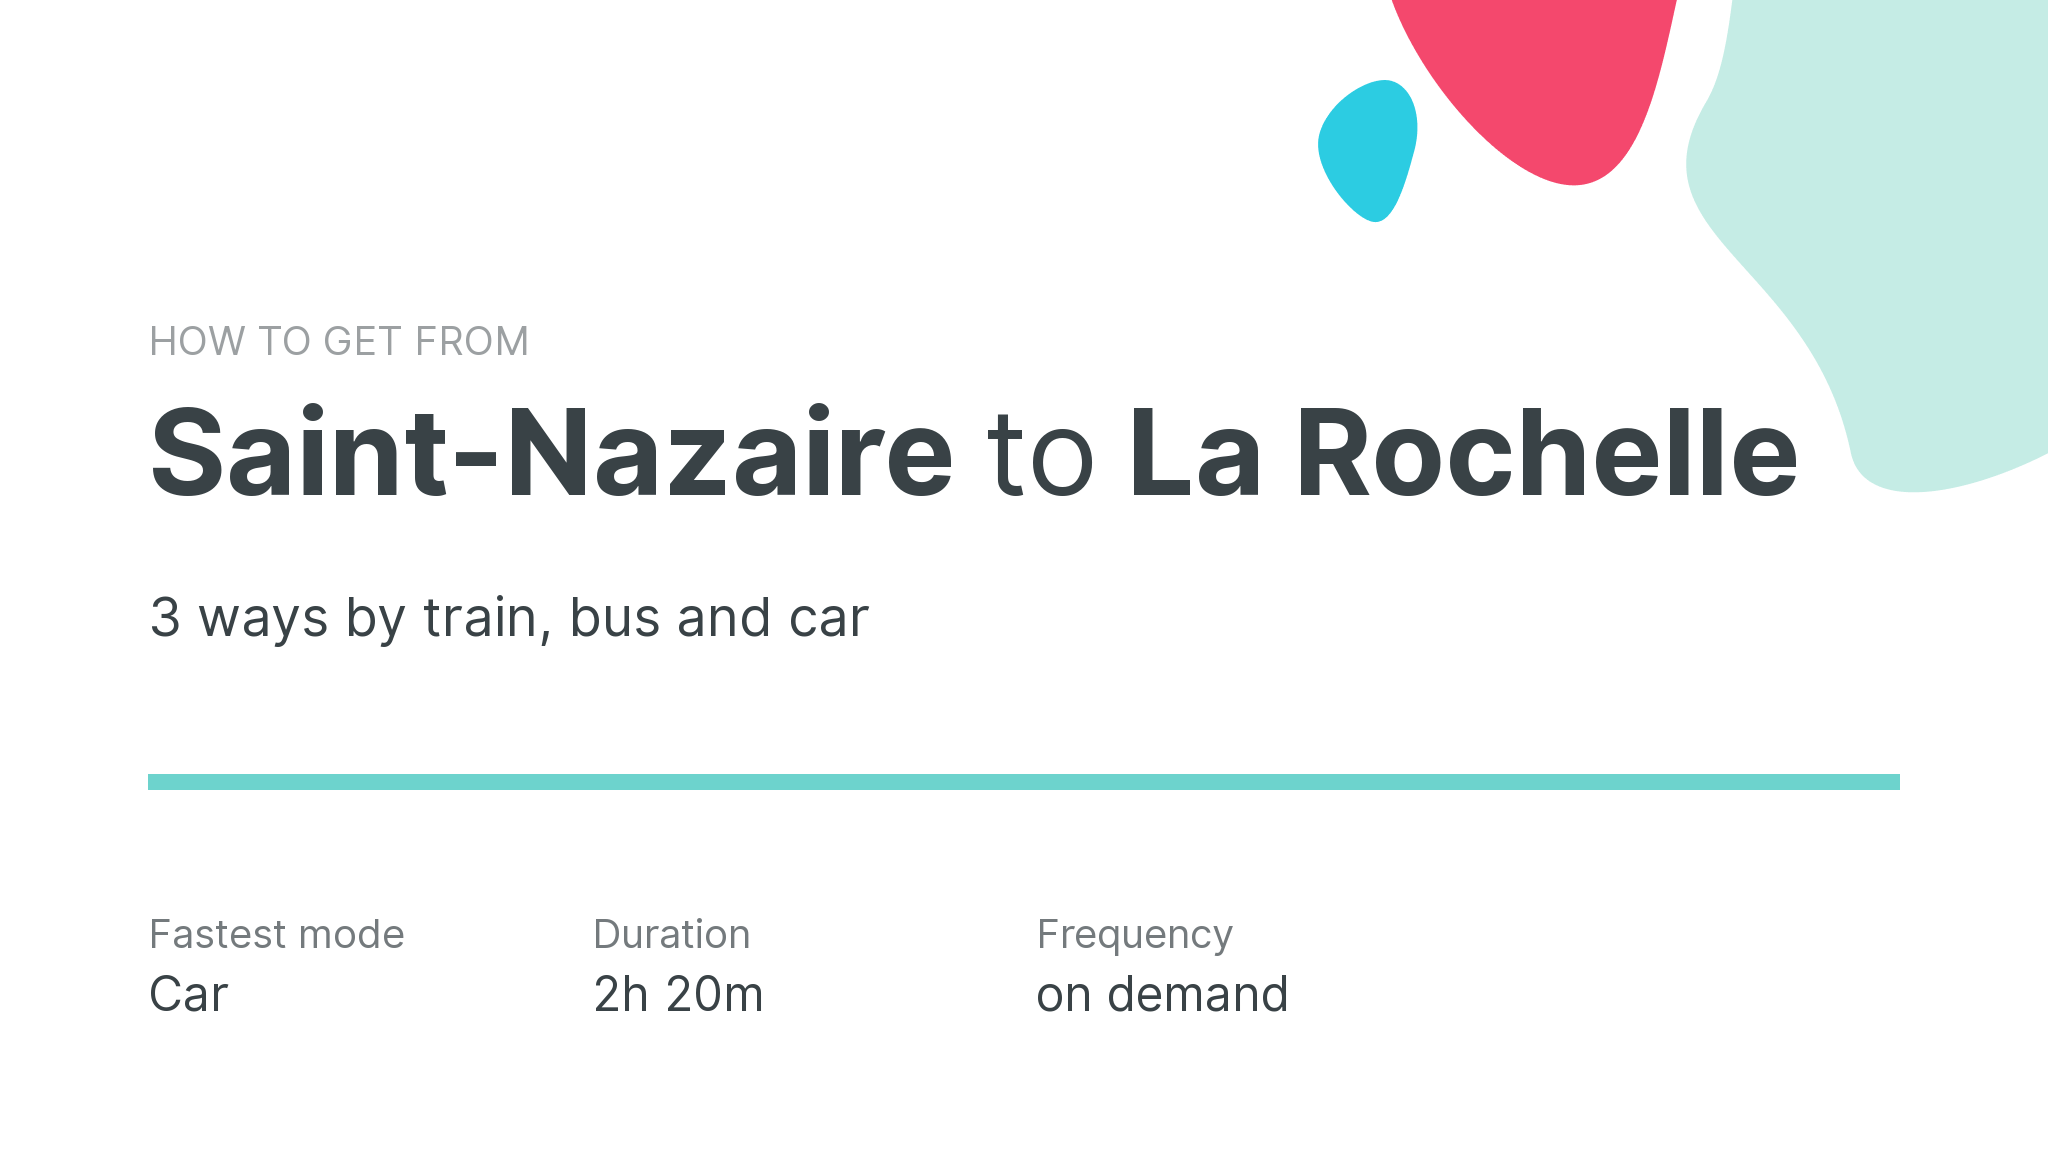 How do I get from Saint-Nazaire to La Rochelle